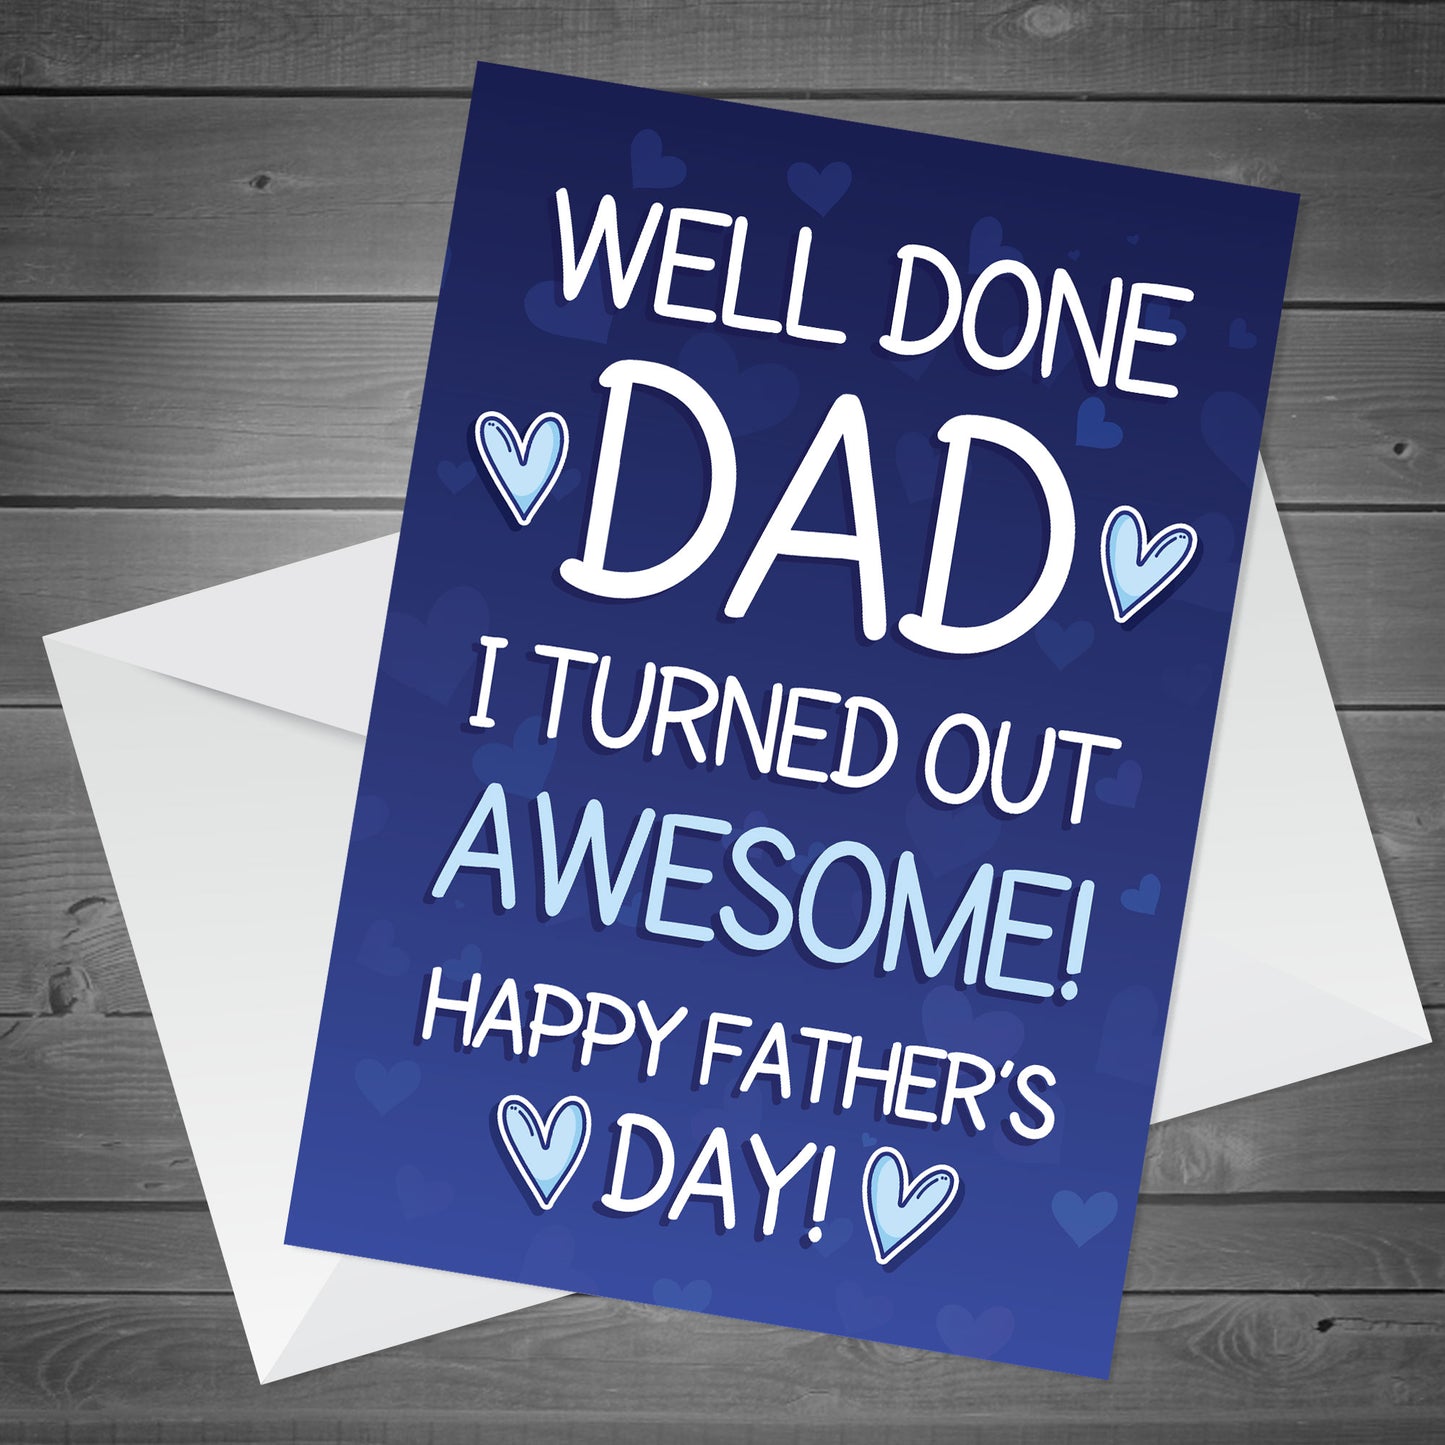 Red Ocean Funny Cheeky Fathers Day Card Rude Humour Card